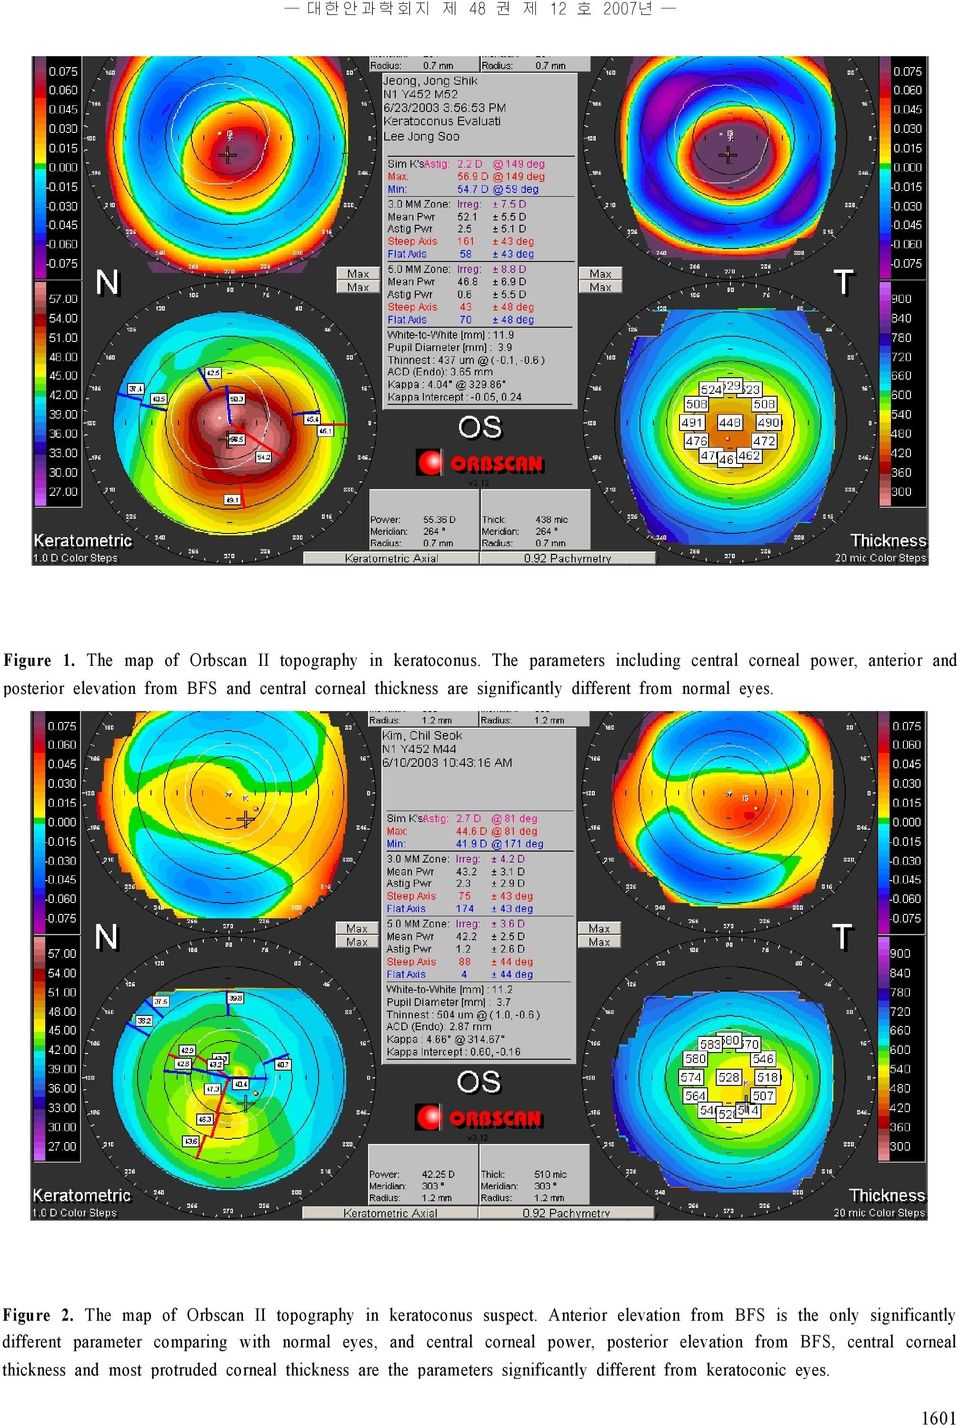 different from normal eyes. Figure 2. The map of Orbscan II topography in keratoconus suspect.